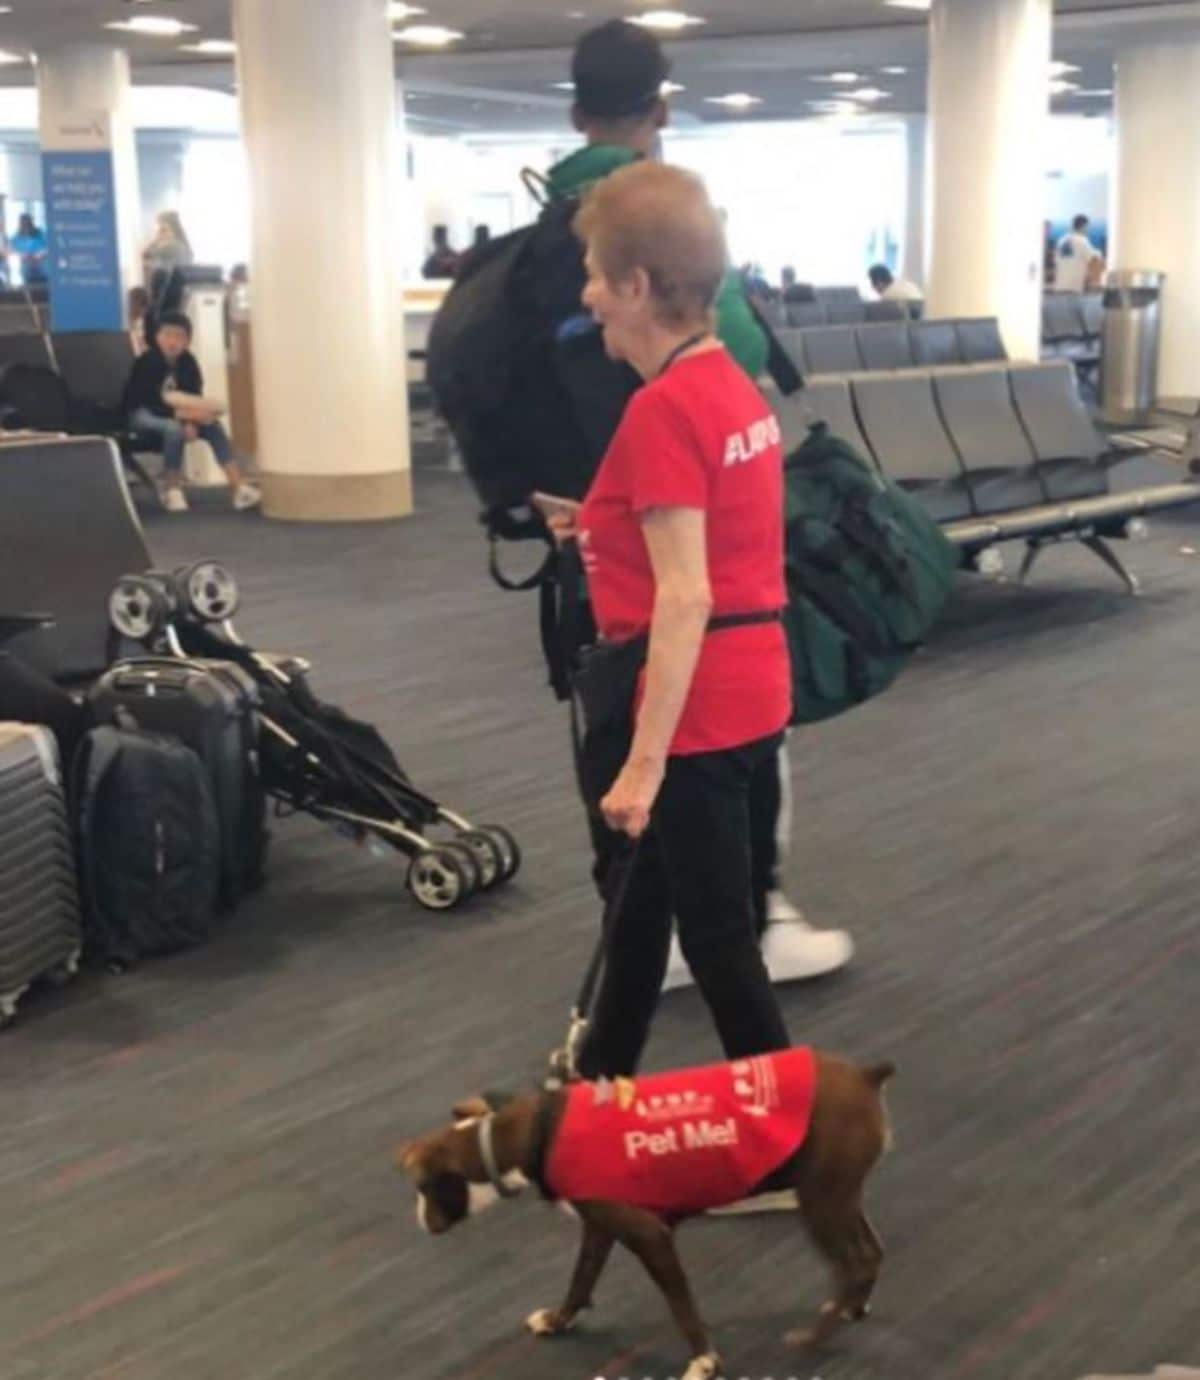 a brown dog is in a red vest next to a woman in a red shirt at an airport